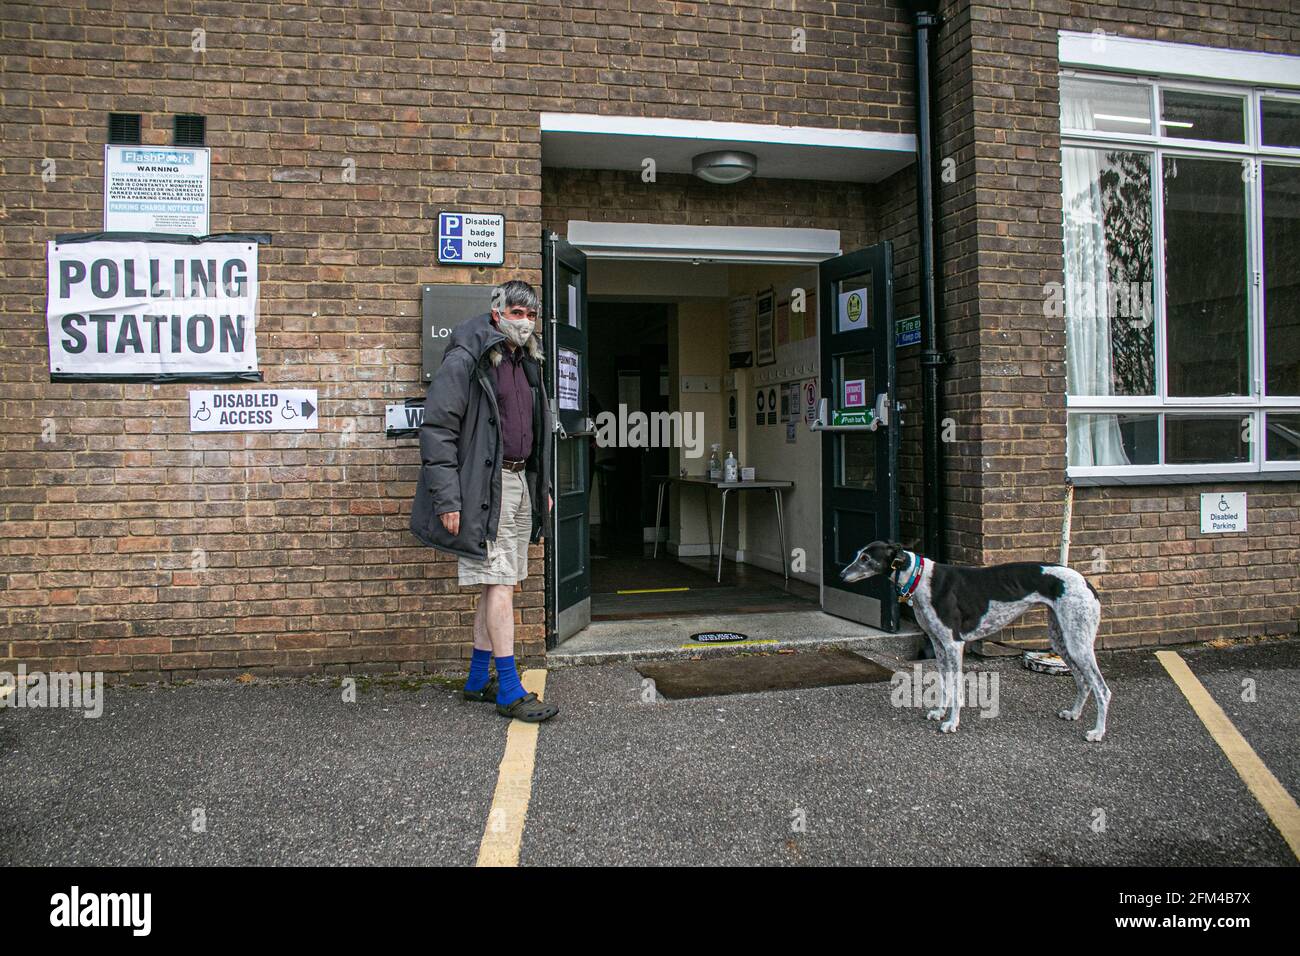 WIMBLEDON LONDON 6 May 2021. A man walks with his dog to the  polling station at the Sacred Heart church in Wimbledon to vote as millions of voters go to the polls on what is known as Super Thursday for the first time in two years  across the country for the London Mayor and to elect  Scottish and Welsh Parliaments, as well as Regional Mayor and  councillors. The local elections were postponed last year due to the coronavirus pandemic. Credit amer ghazzal/Alamy Live News Stock Photo